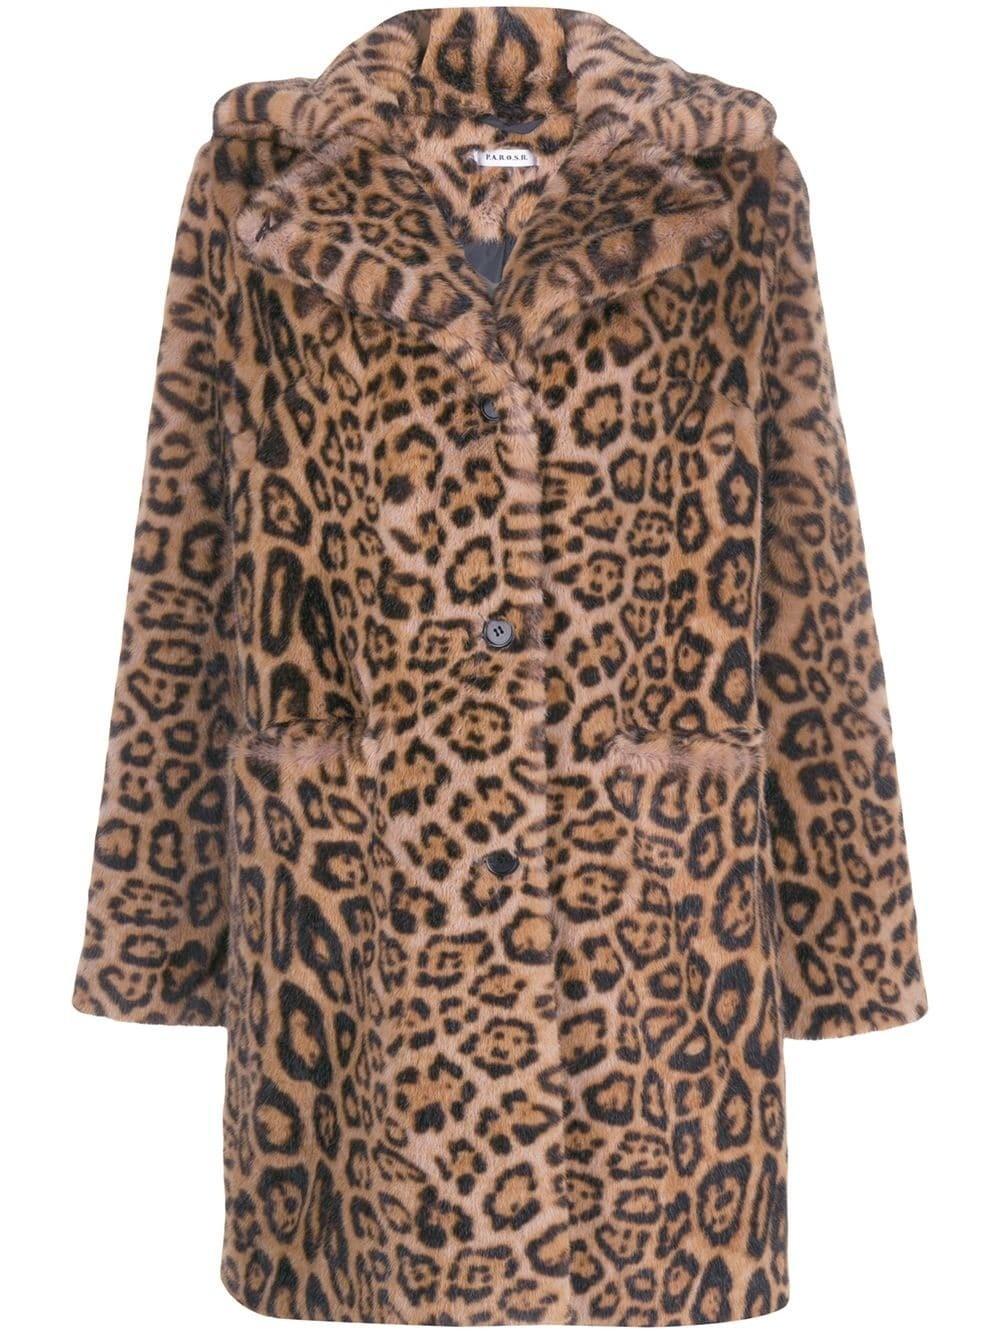 P.A.R.O.S.H. Synthetic Leopard Pattern Coat in Beige (Natural) - Lyst